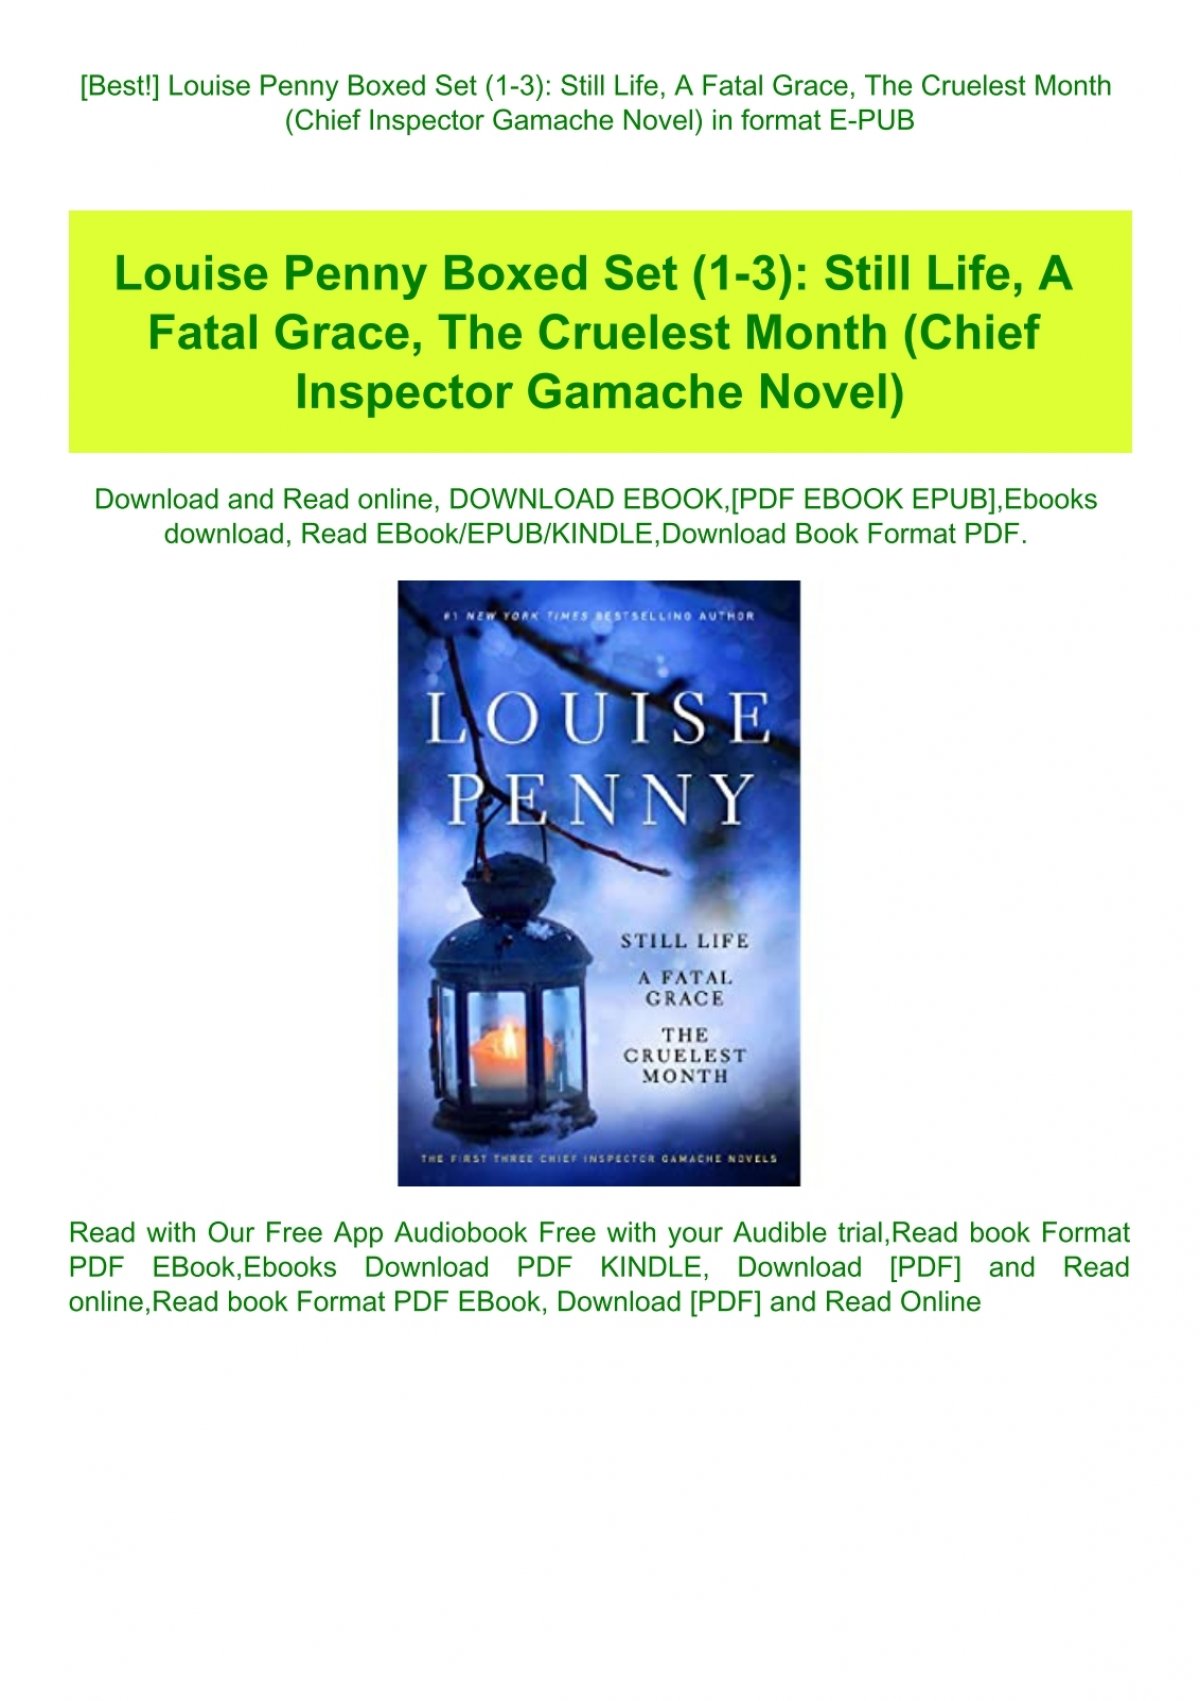 The Cruelest Month by Louise Penny